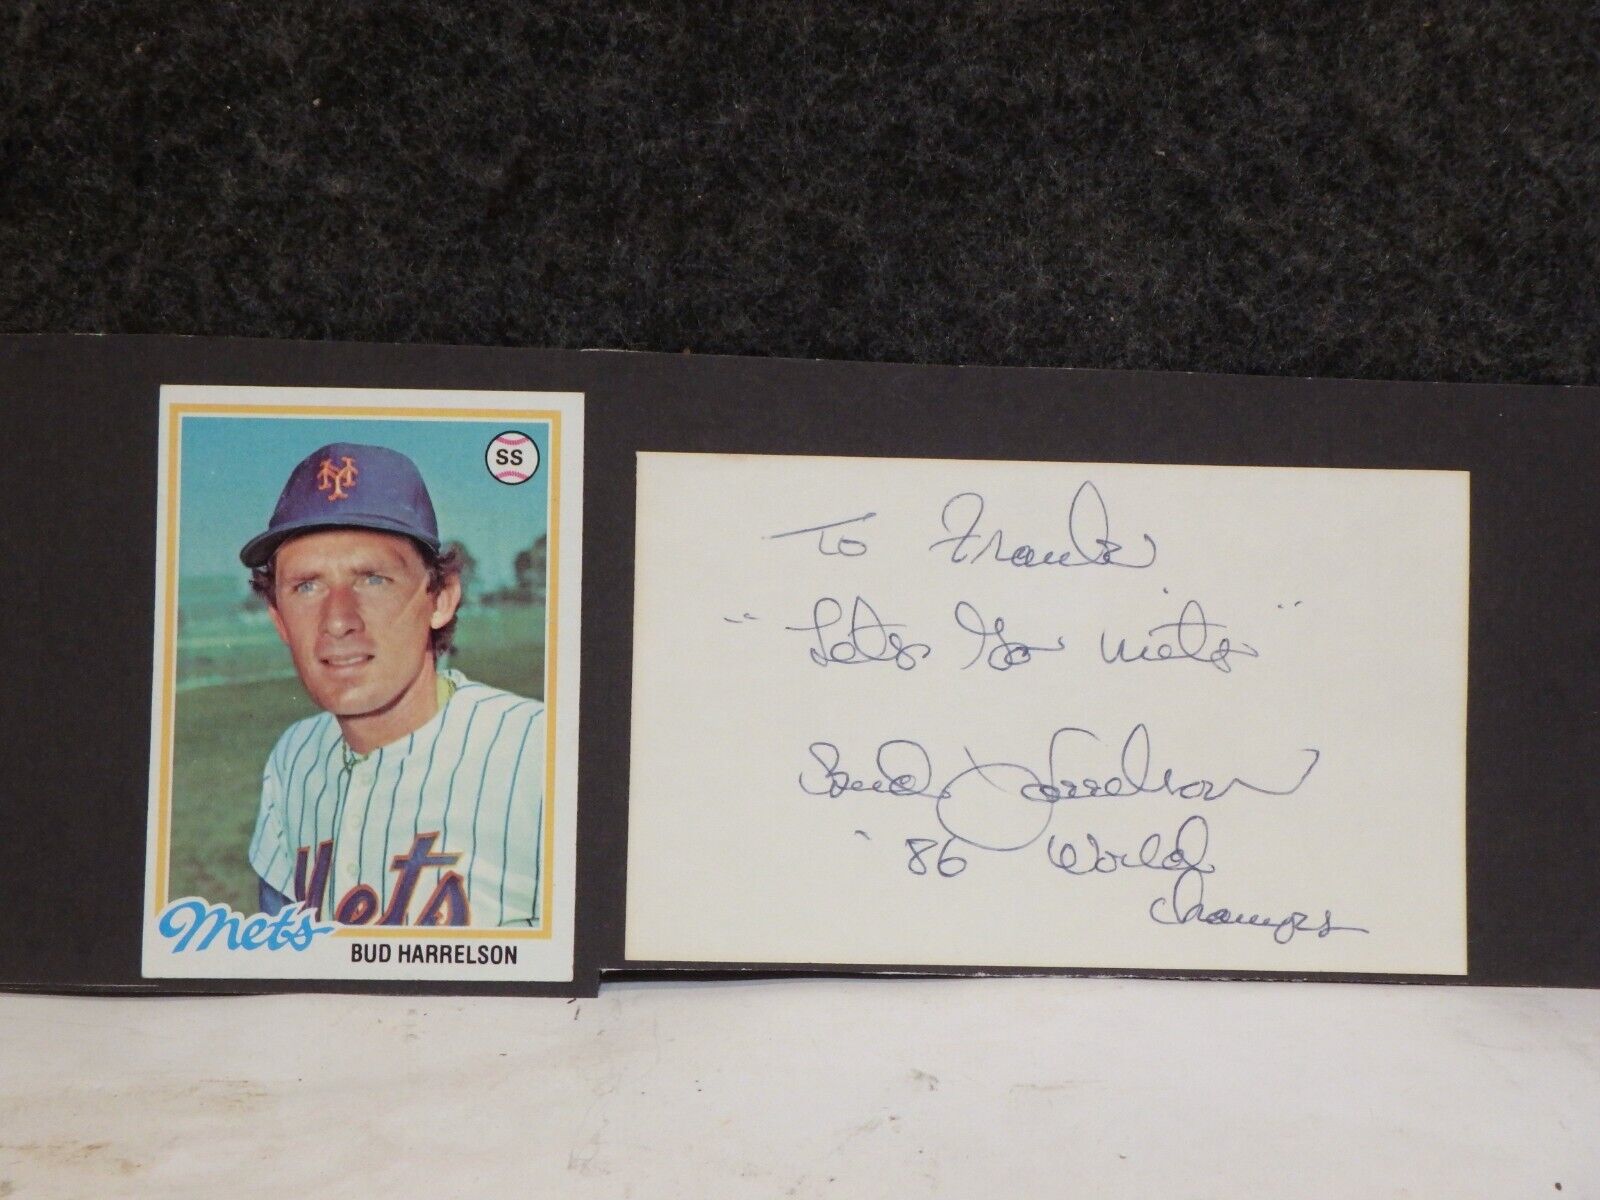 VINTAGE 1978 BUD HARRELSON NEW YORK METS AUTOGRAPHED CARD WITH BASEBALL CARD